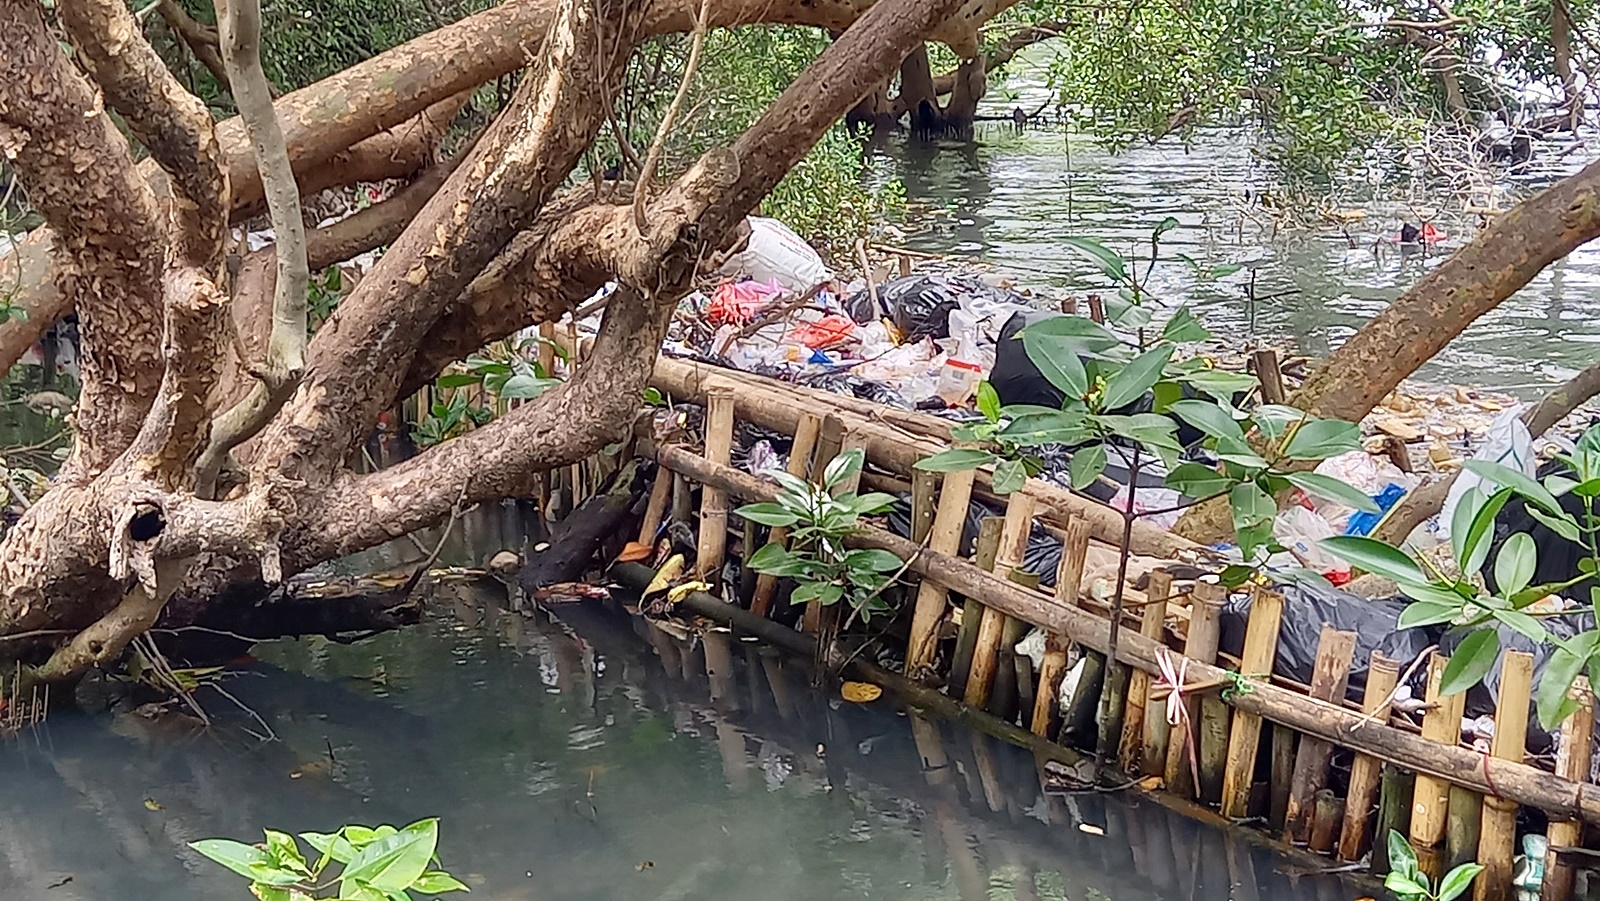 A bamboo fence was planted to intercept marine plastic debris from entering the mangrove area